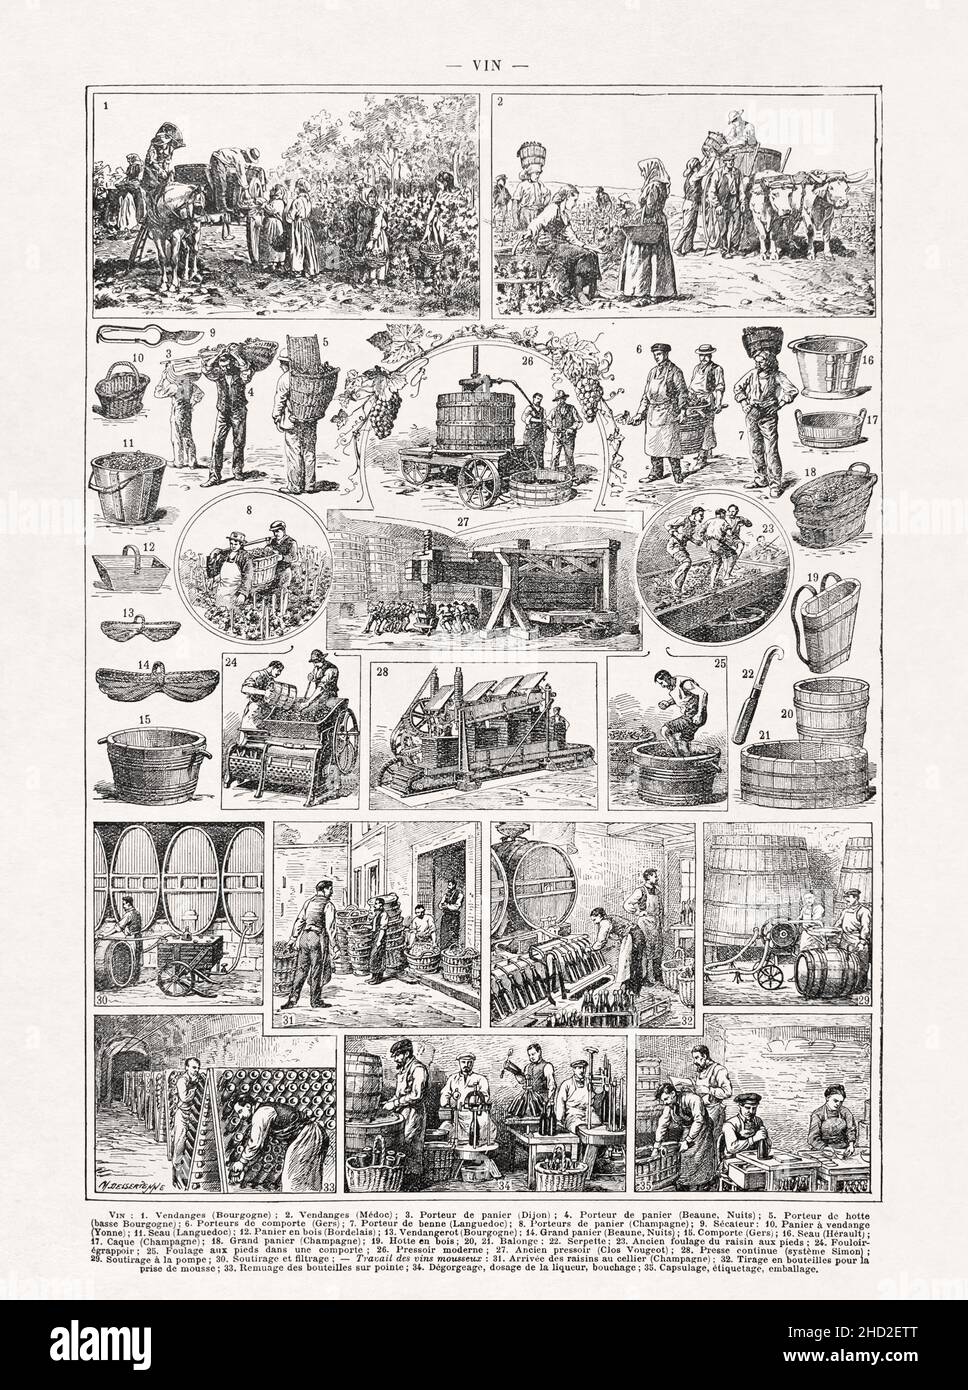 Illustration about French Winemaking by M. Dessertenne published in the late 19th century. Stock Photo